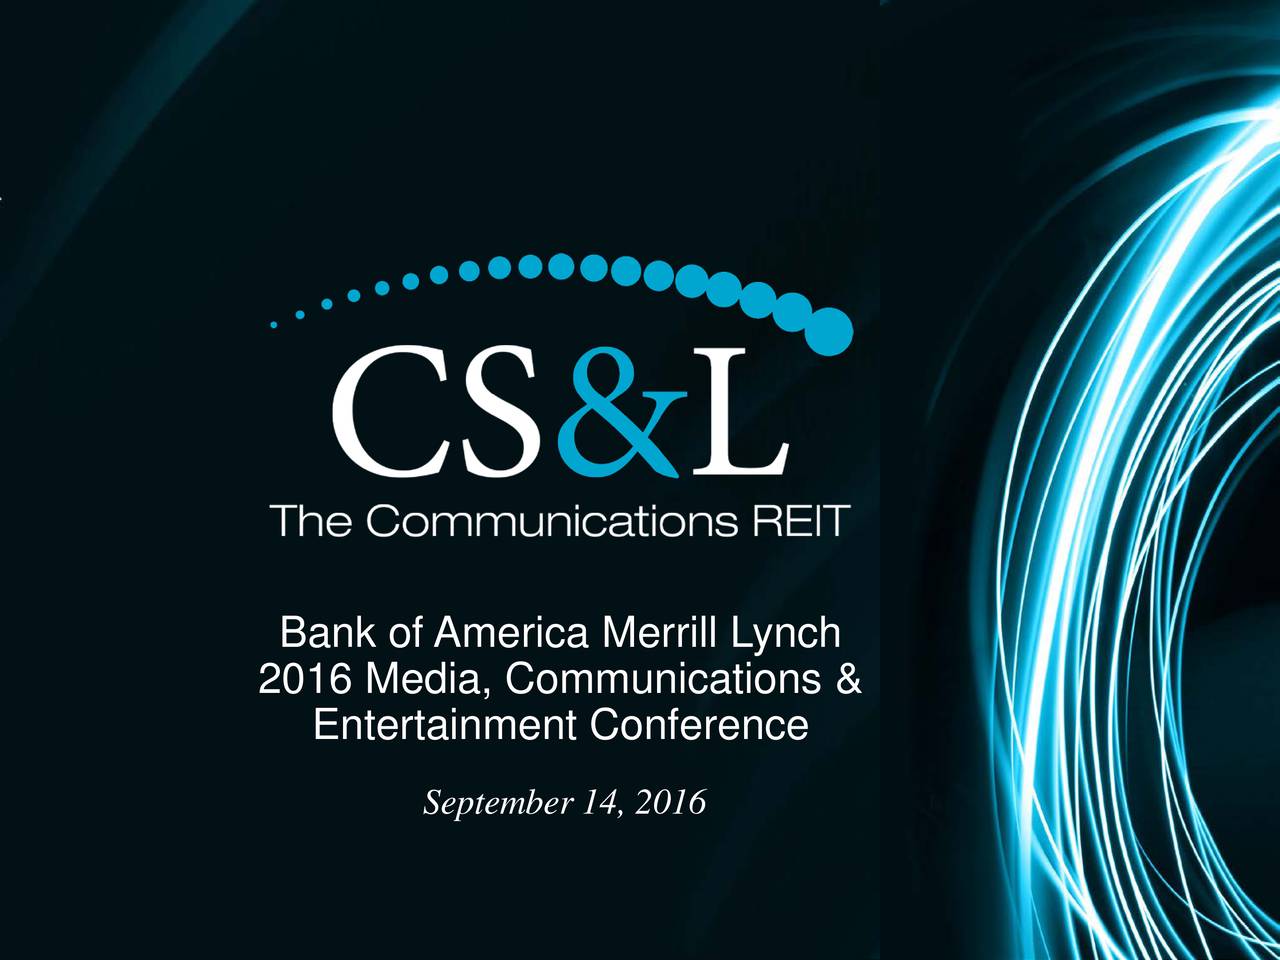 Communications Sales & Leasing (CSAL) Presents at Bank of America